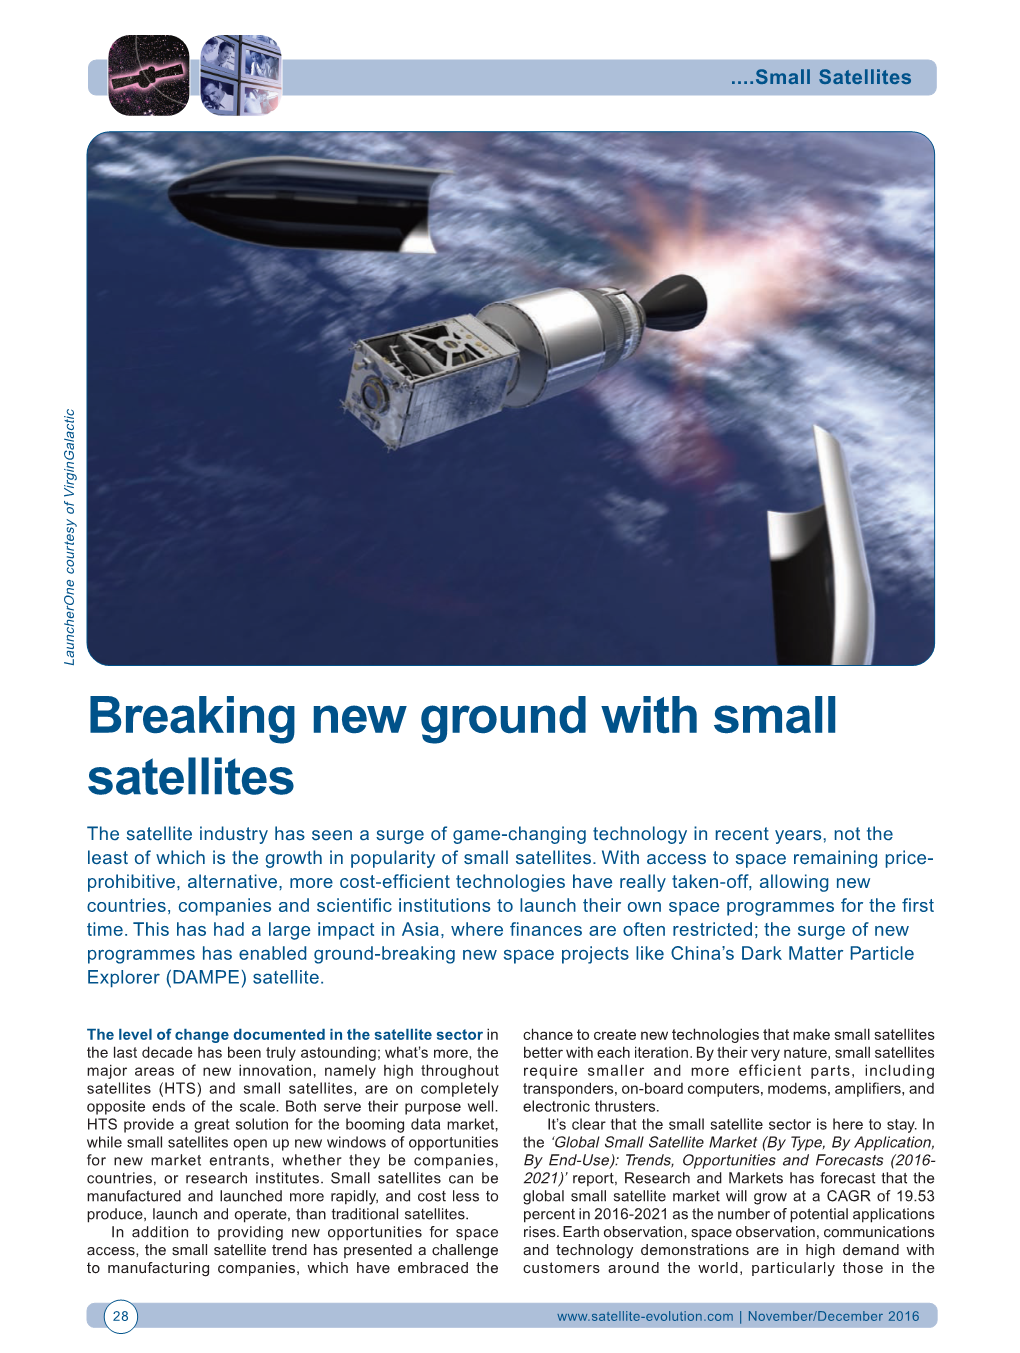 Breaking New Ground with Small Satellites